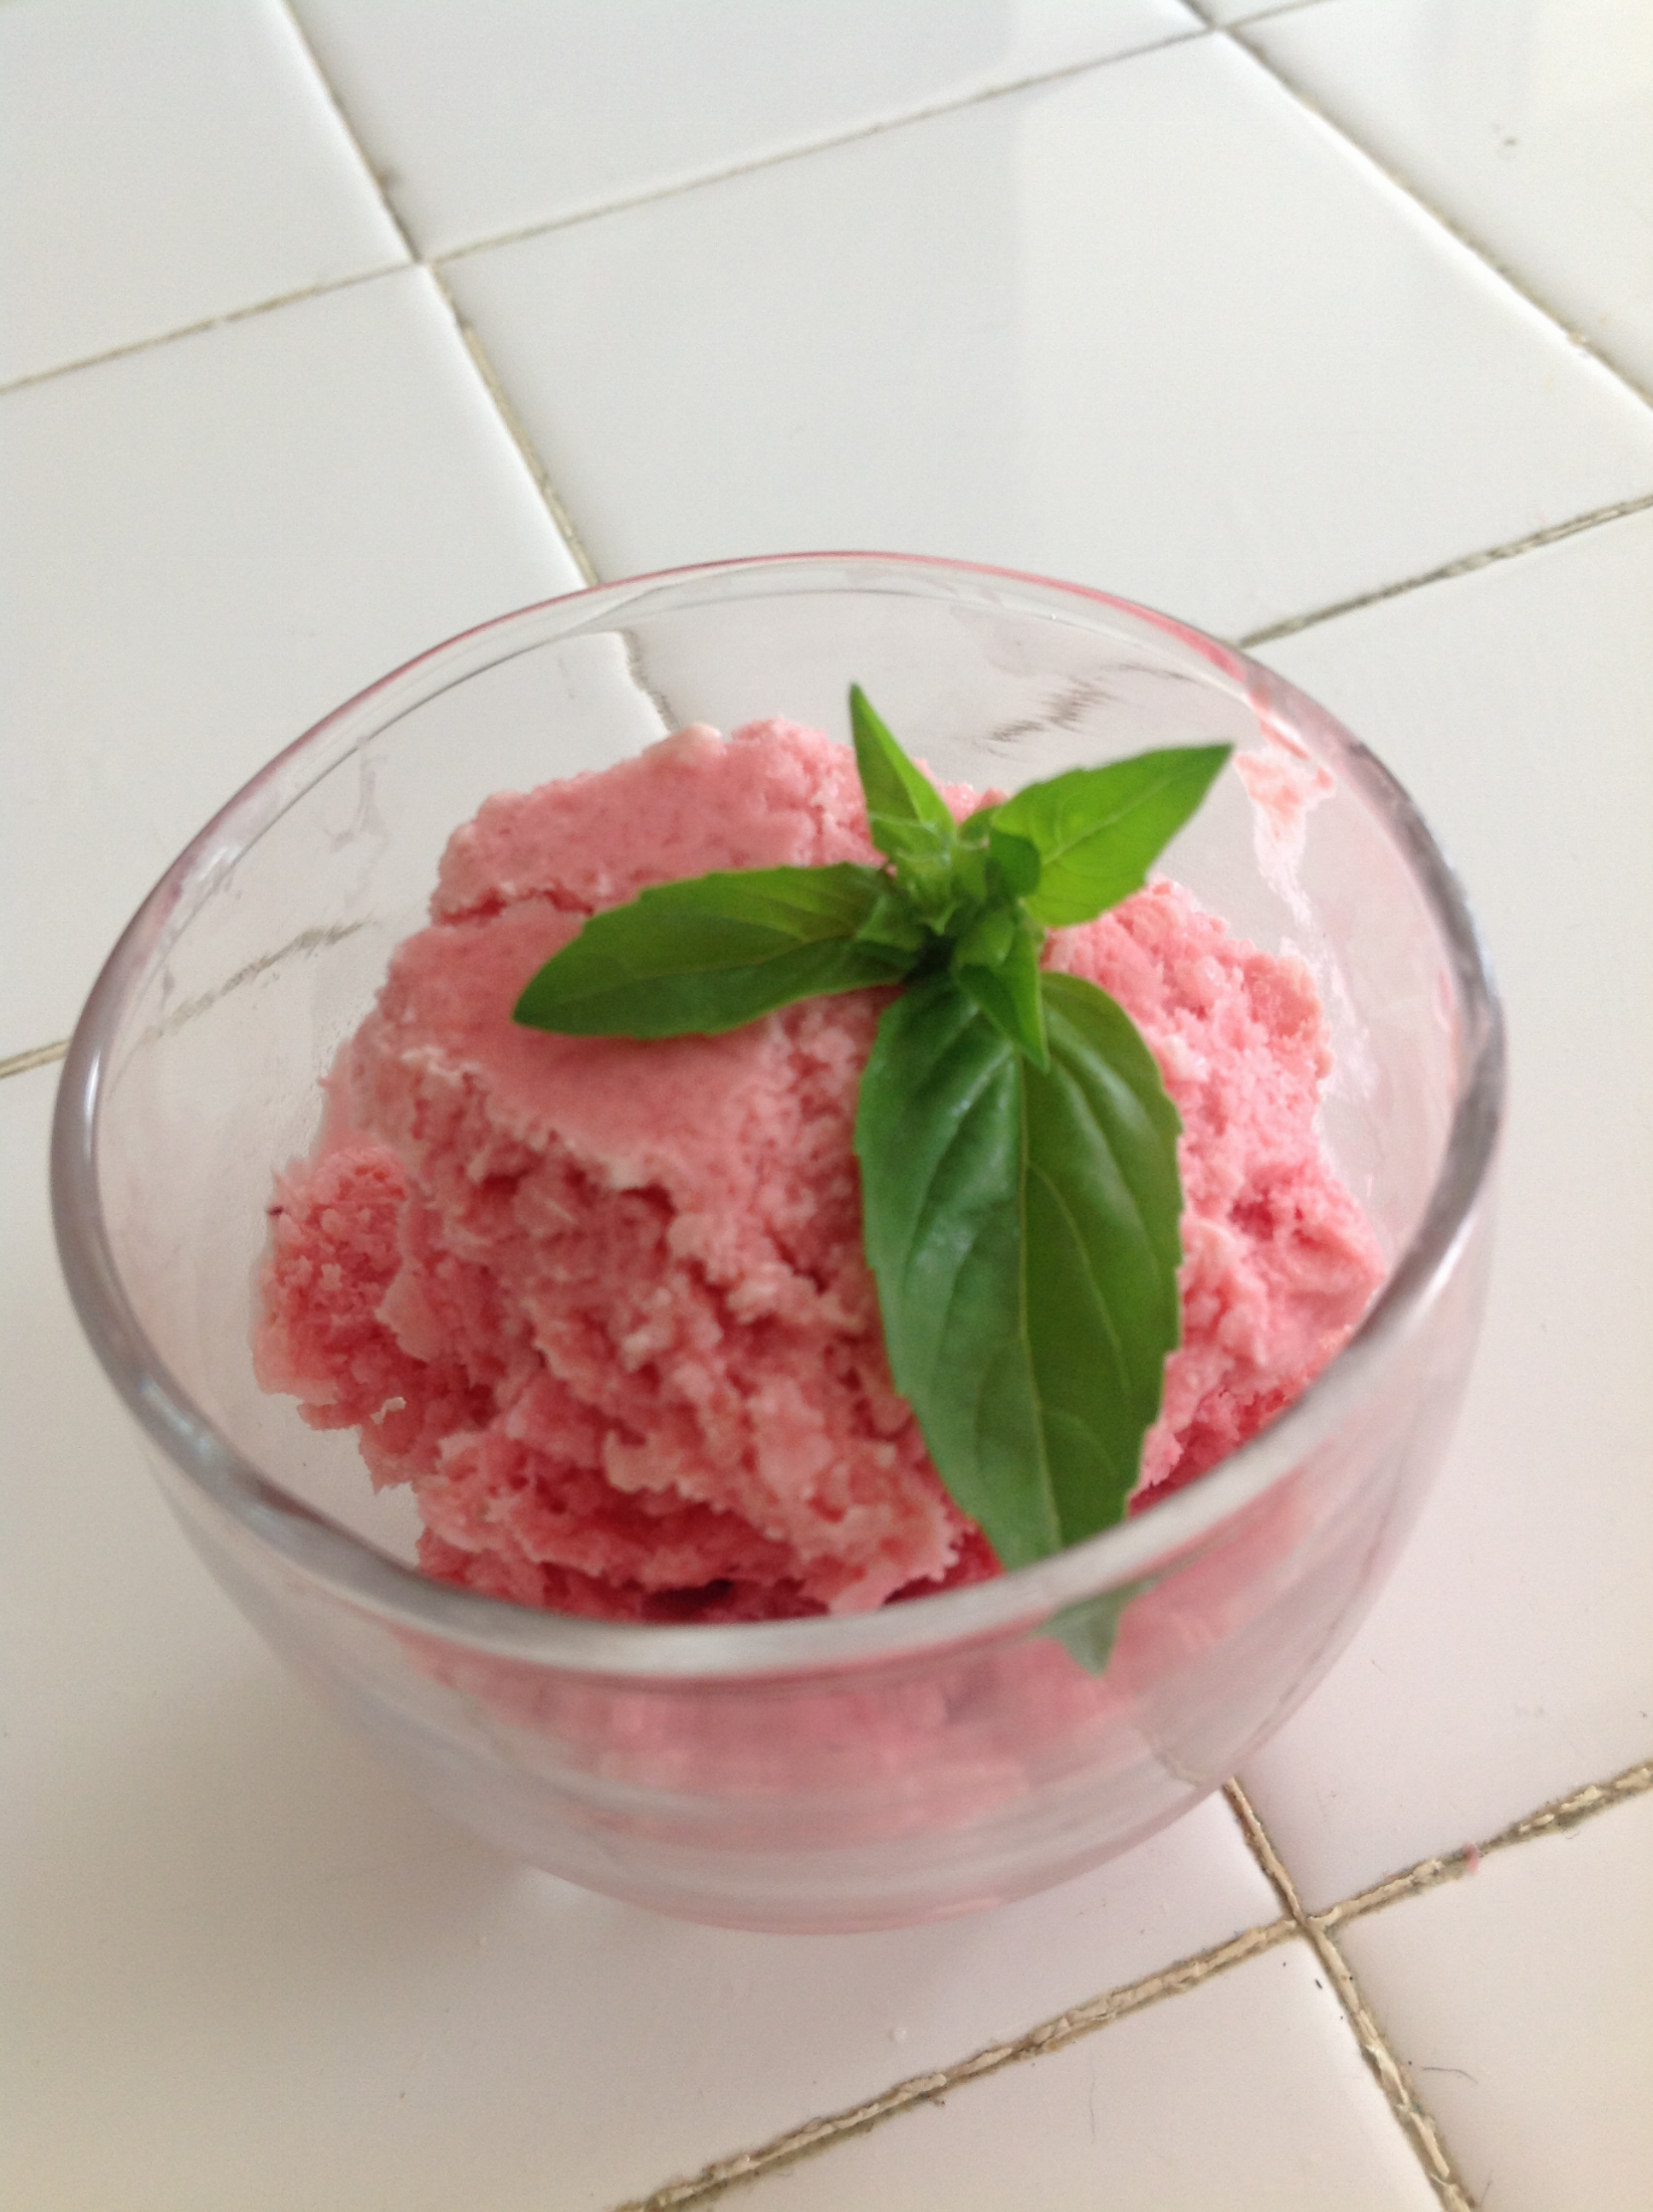 rasperry basil sorbet made with farmers market ingredients